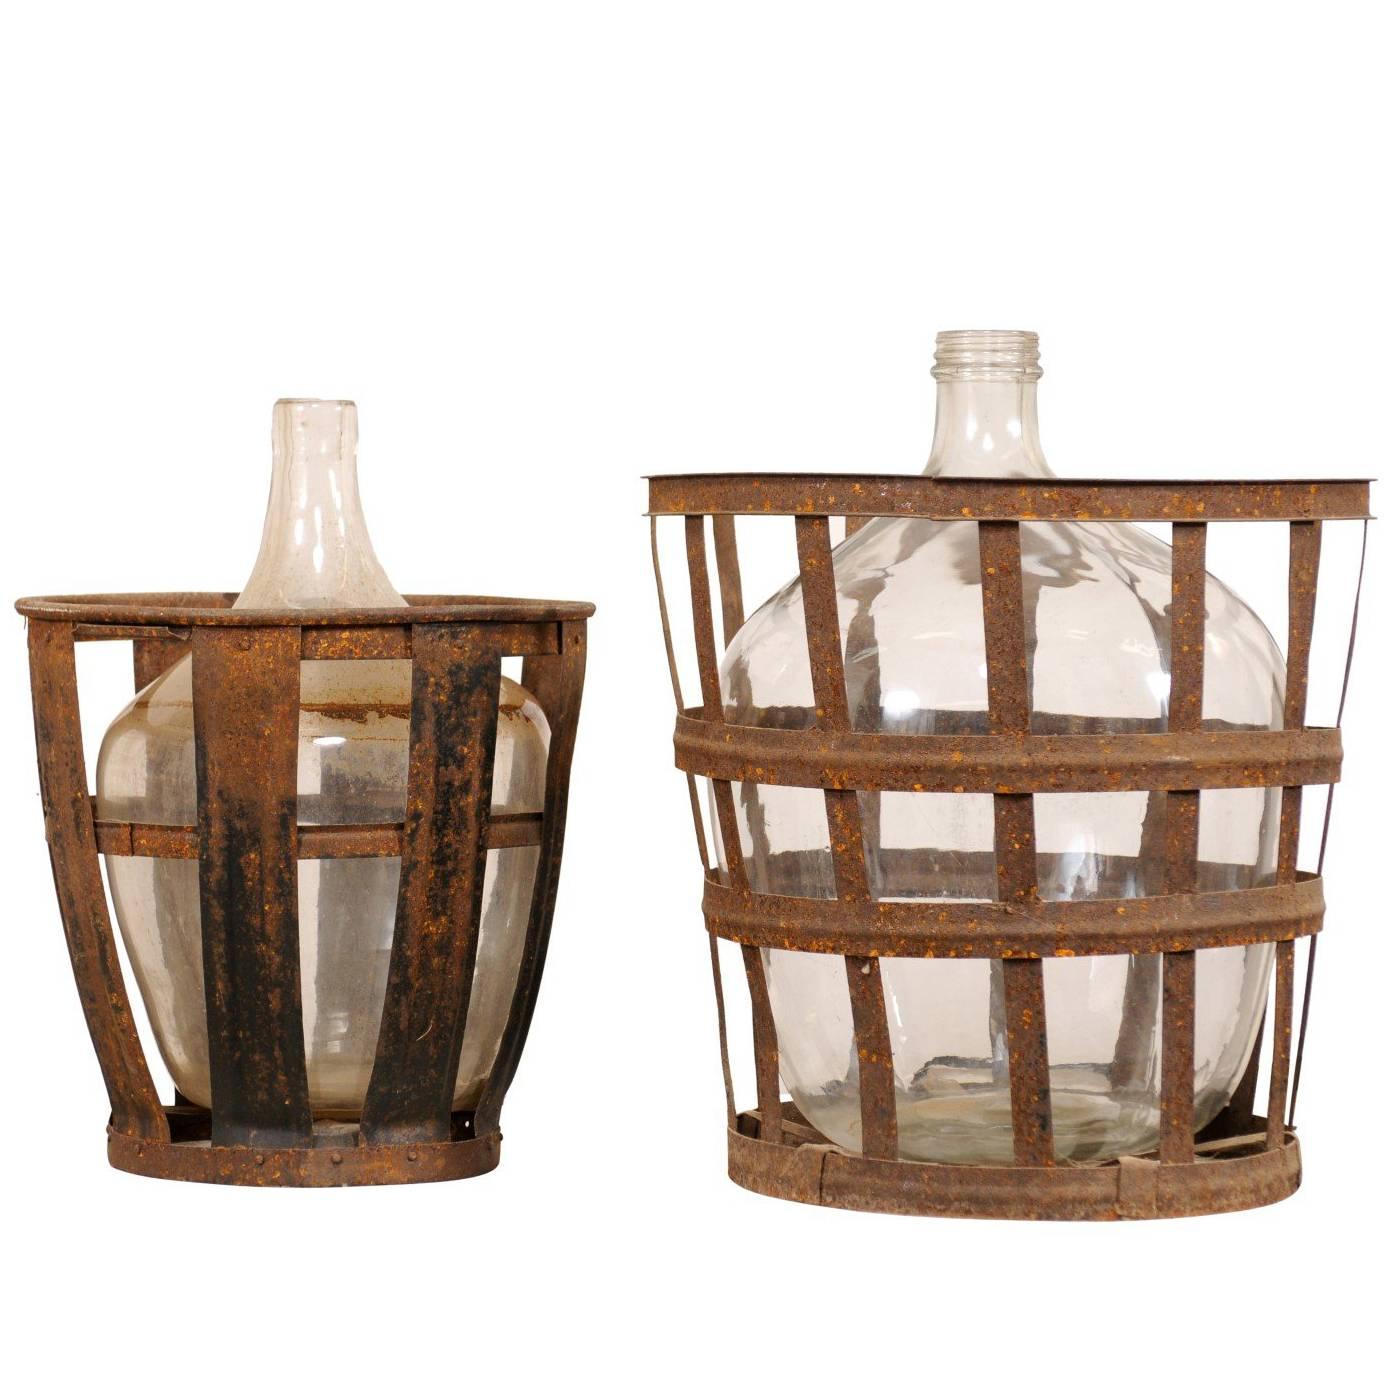 Pair of French Mid-20th Century Vintner Iron Baskets with Demijohn Wine Bottles